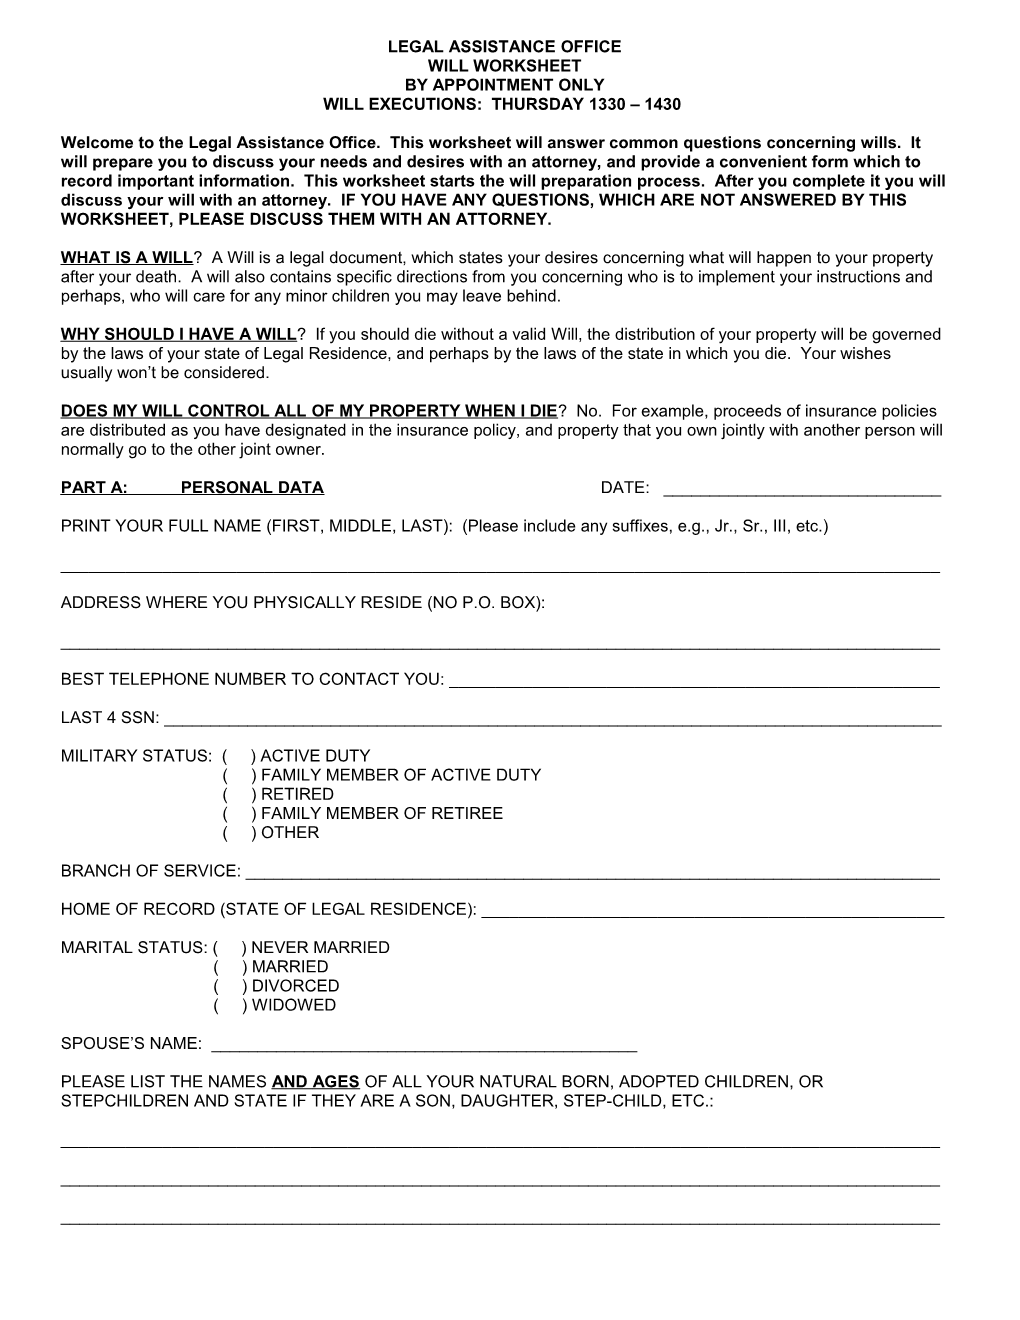 Legal Assistance Office-Will Worksheet